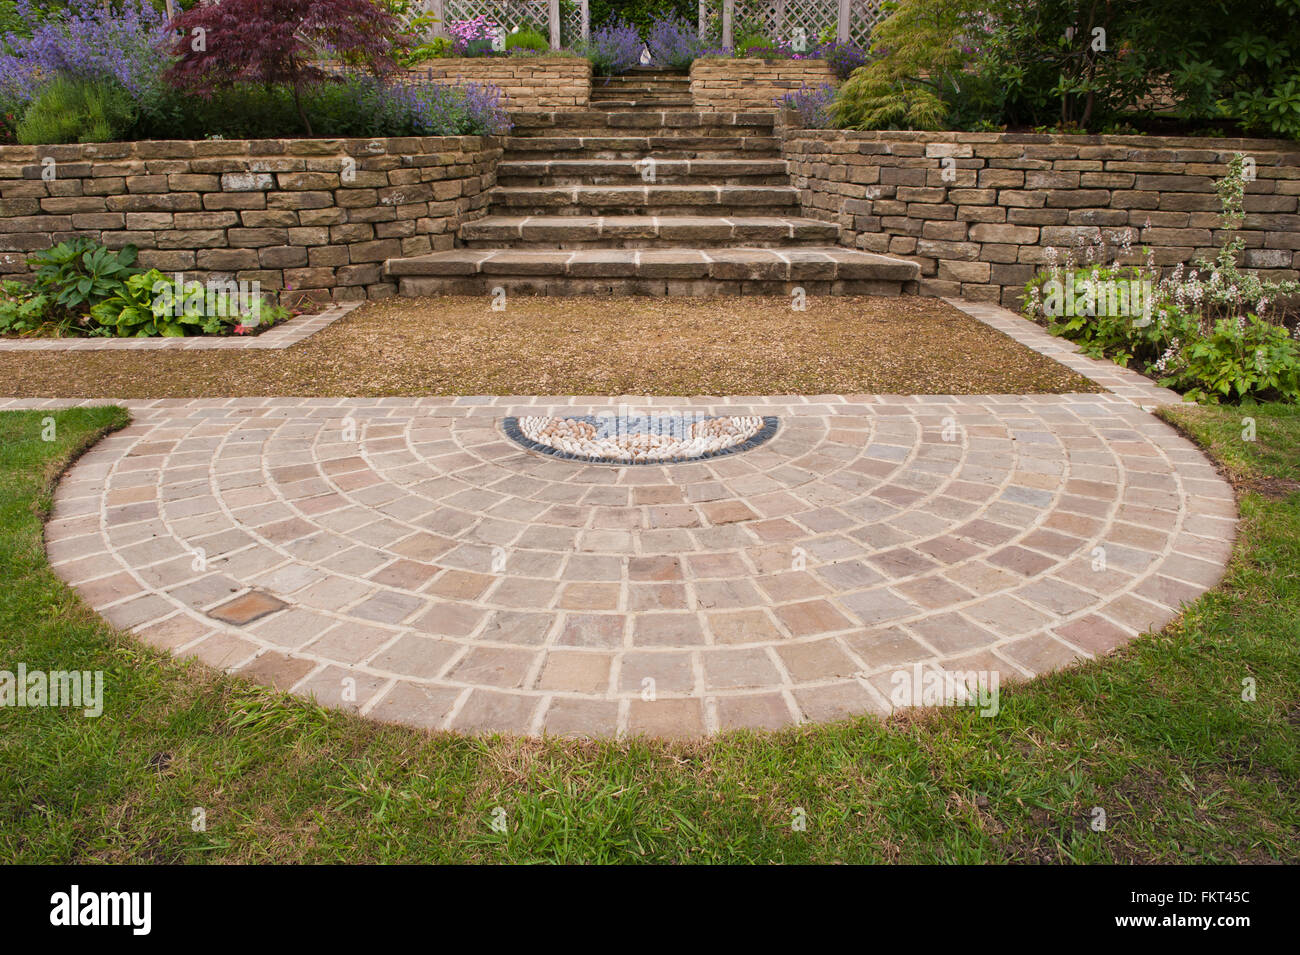 Pebble mosaic, paving, plants, steps, stone wall and terracing - traditional, designed, landscaped, garden, Burley-in-Wharfedale, Yorkshire, England. Stock Photo